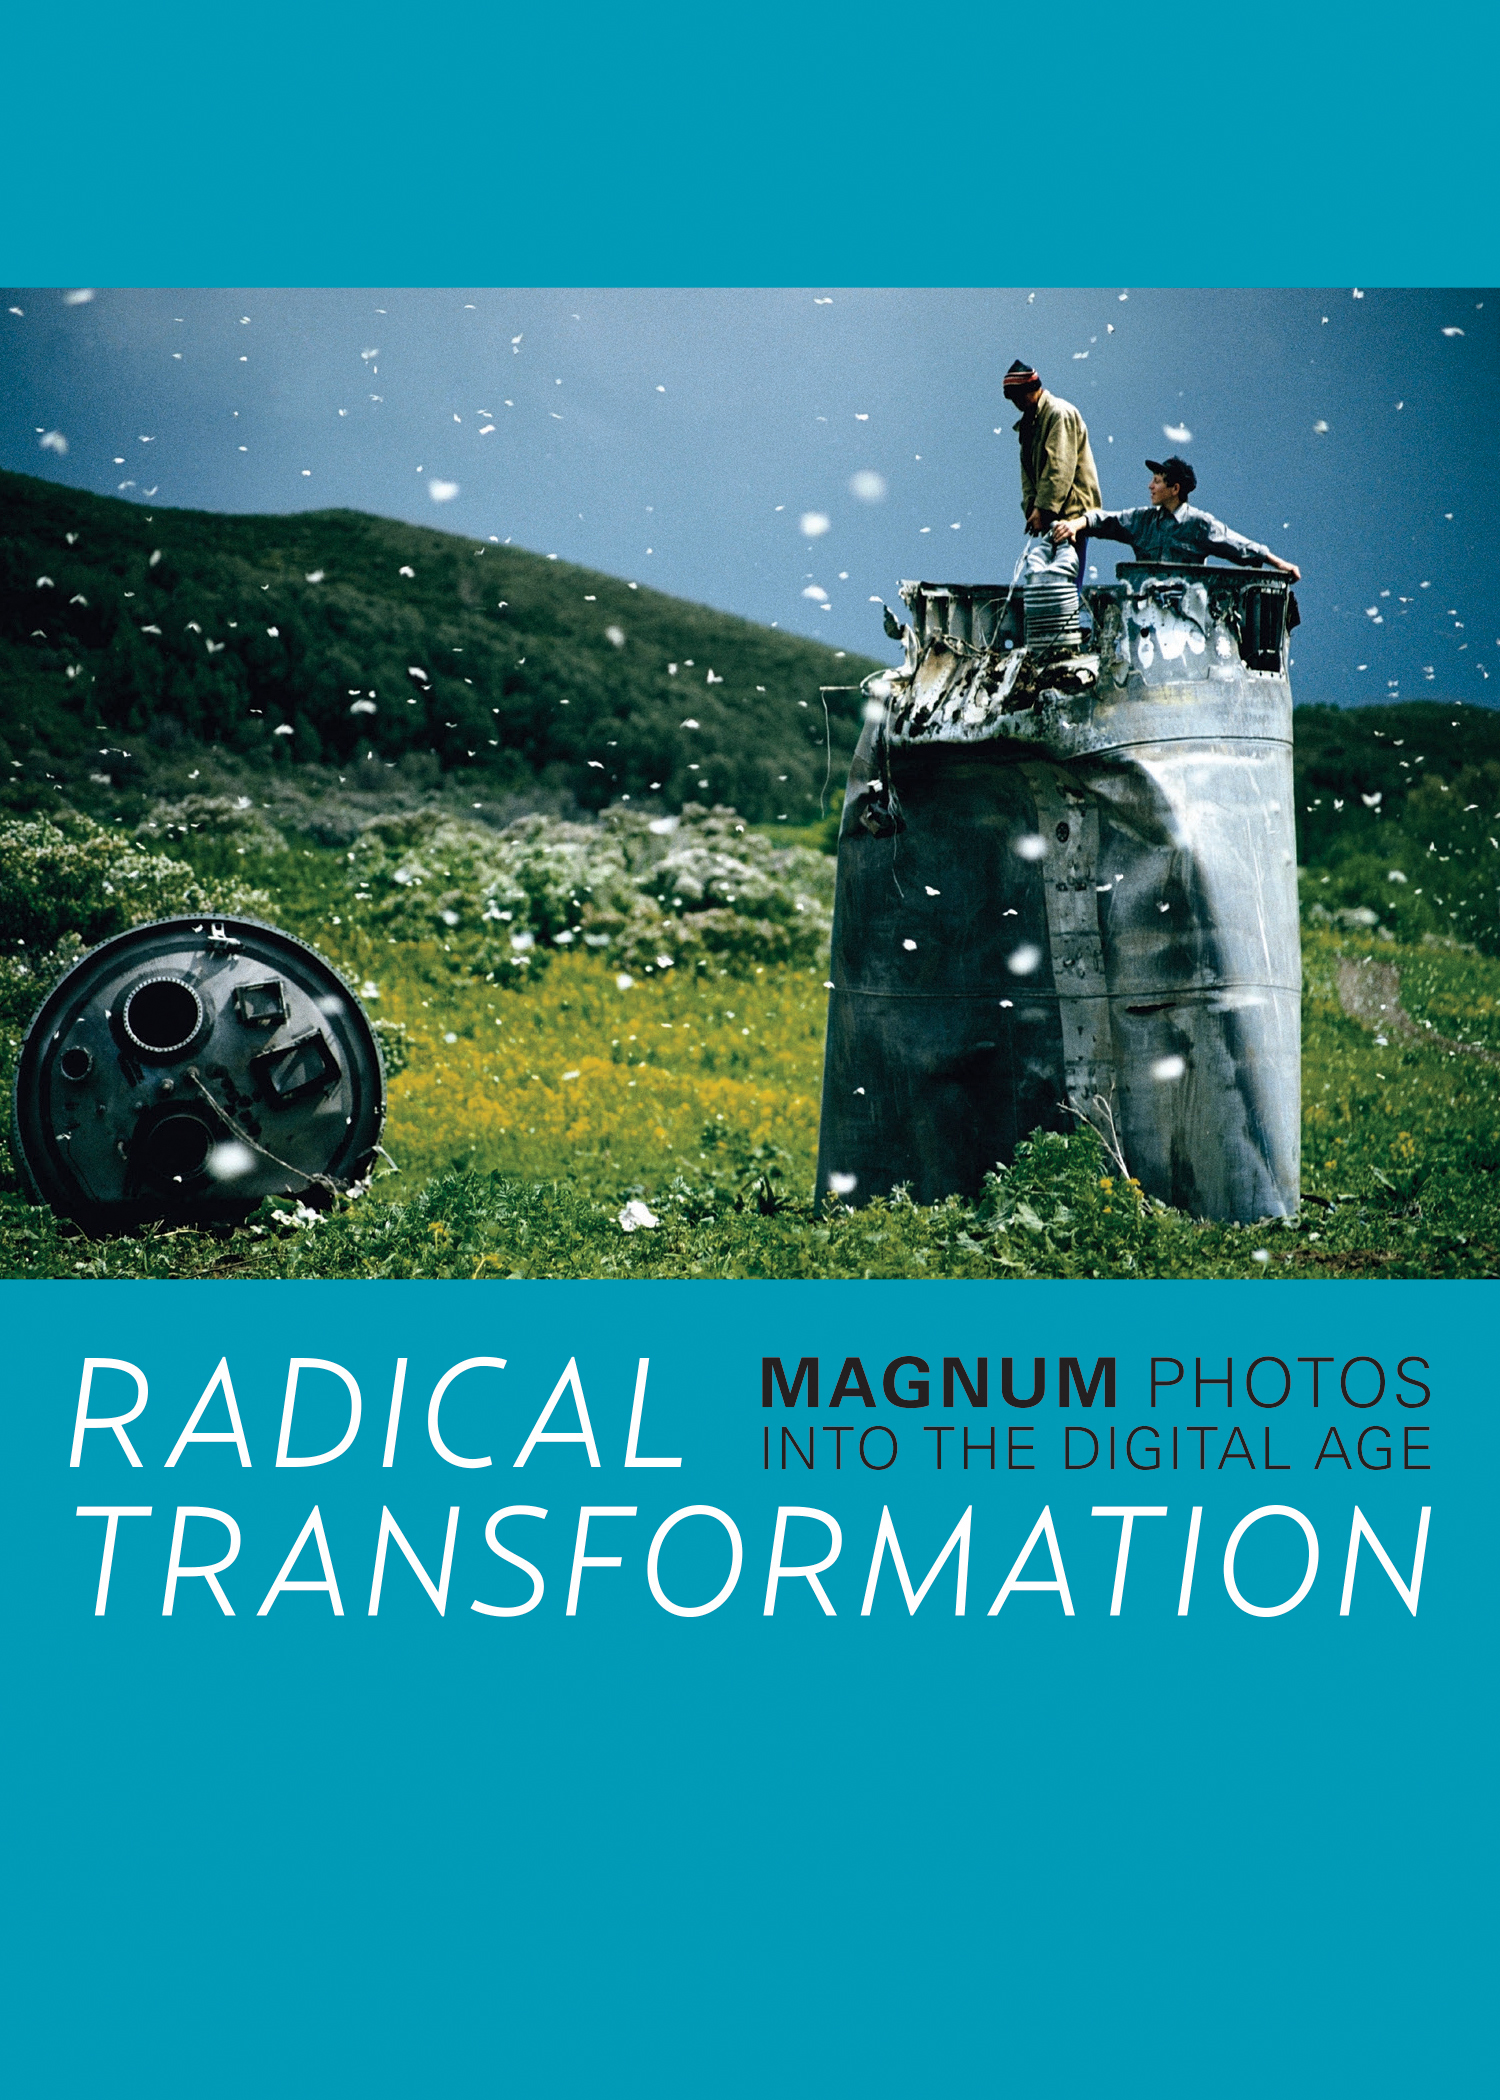 Opening today: "Radical Transformation: Magnum Photos into the Digital Age"